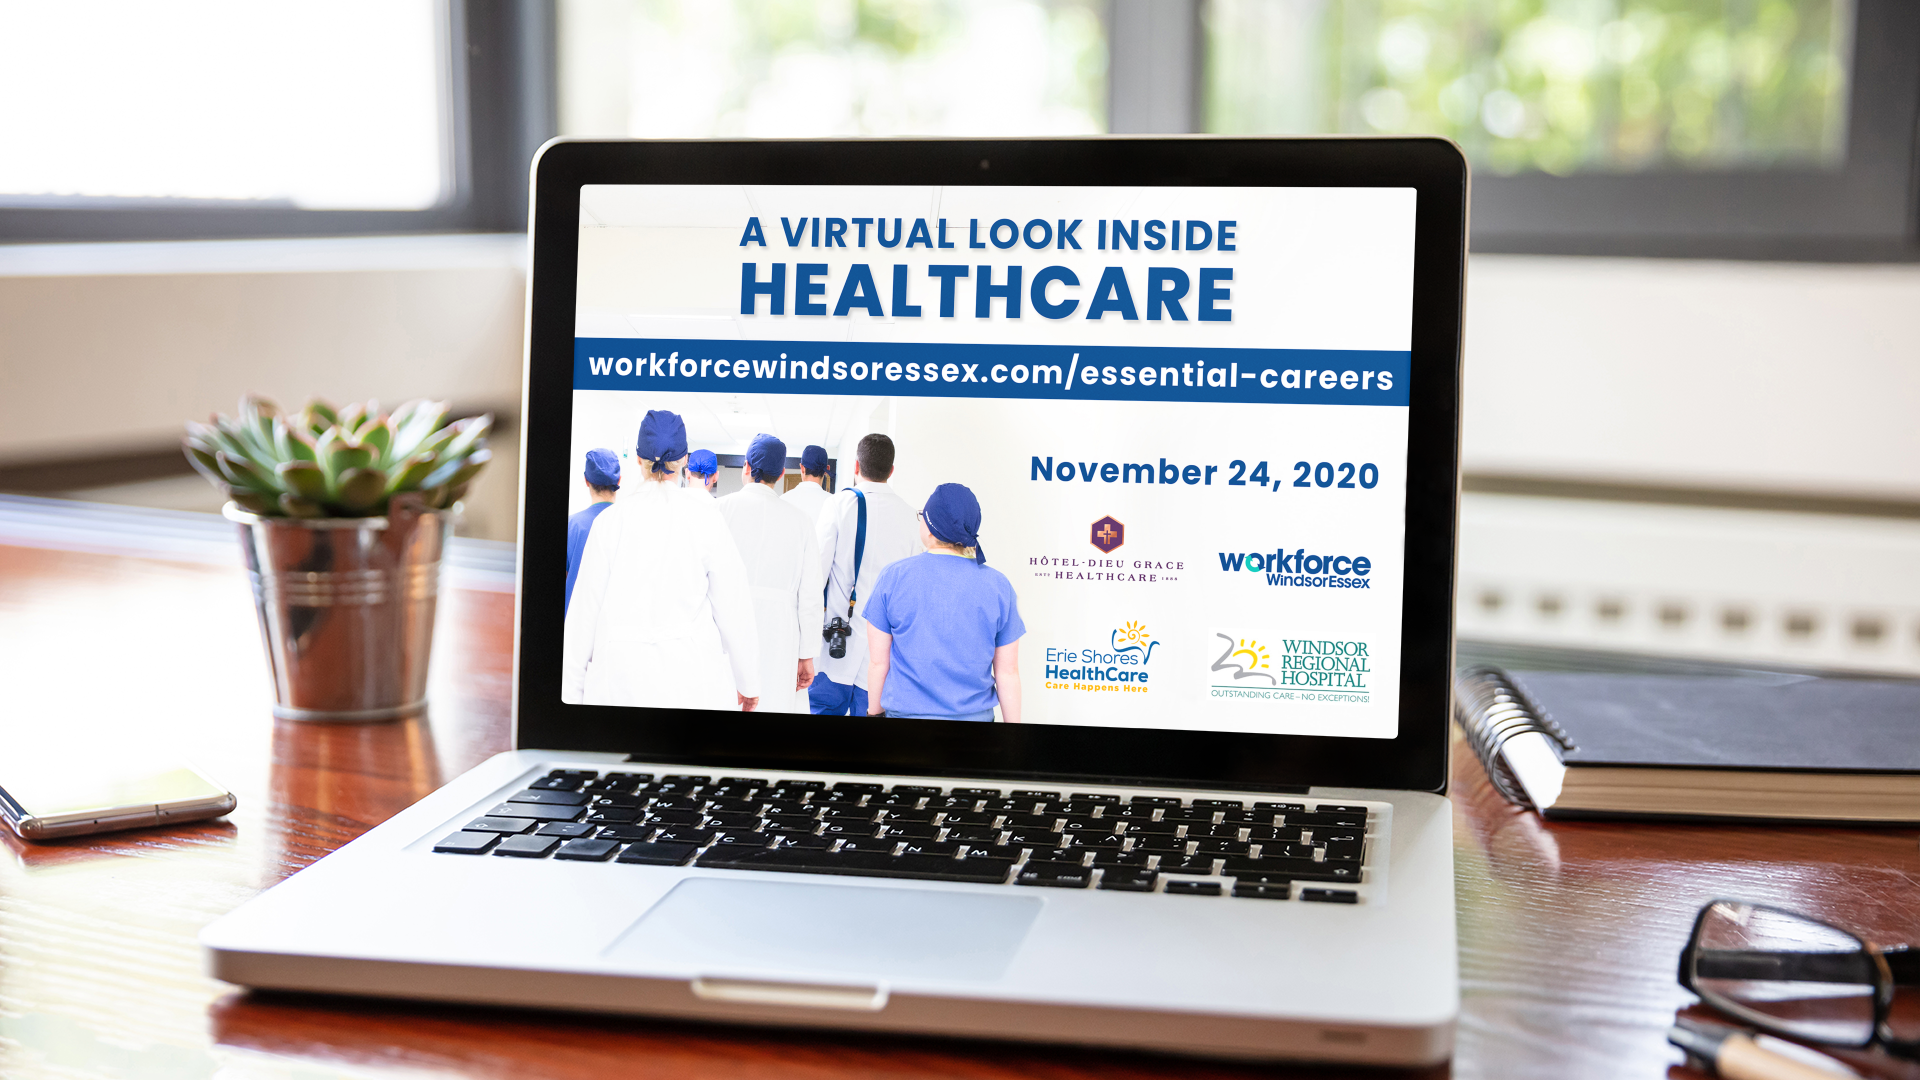 A Virtual Look Inside Healthcare on laptop computer